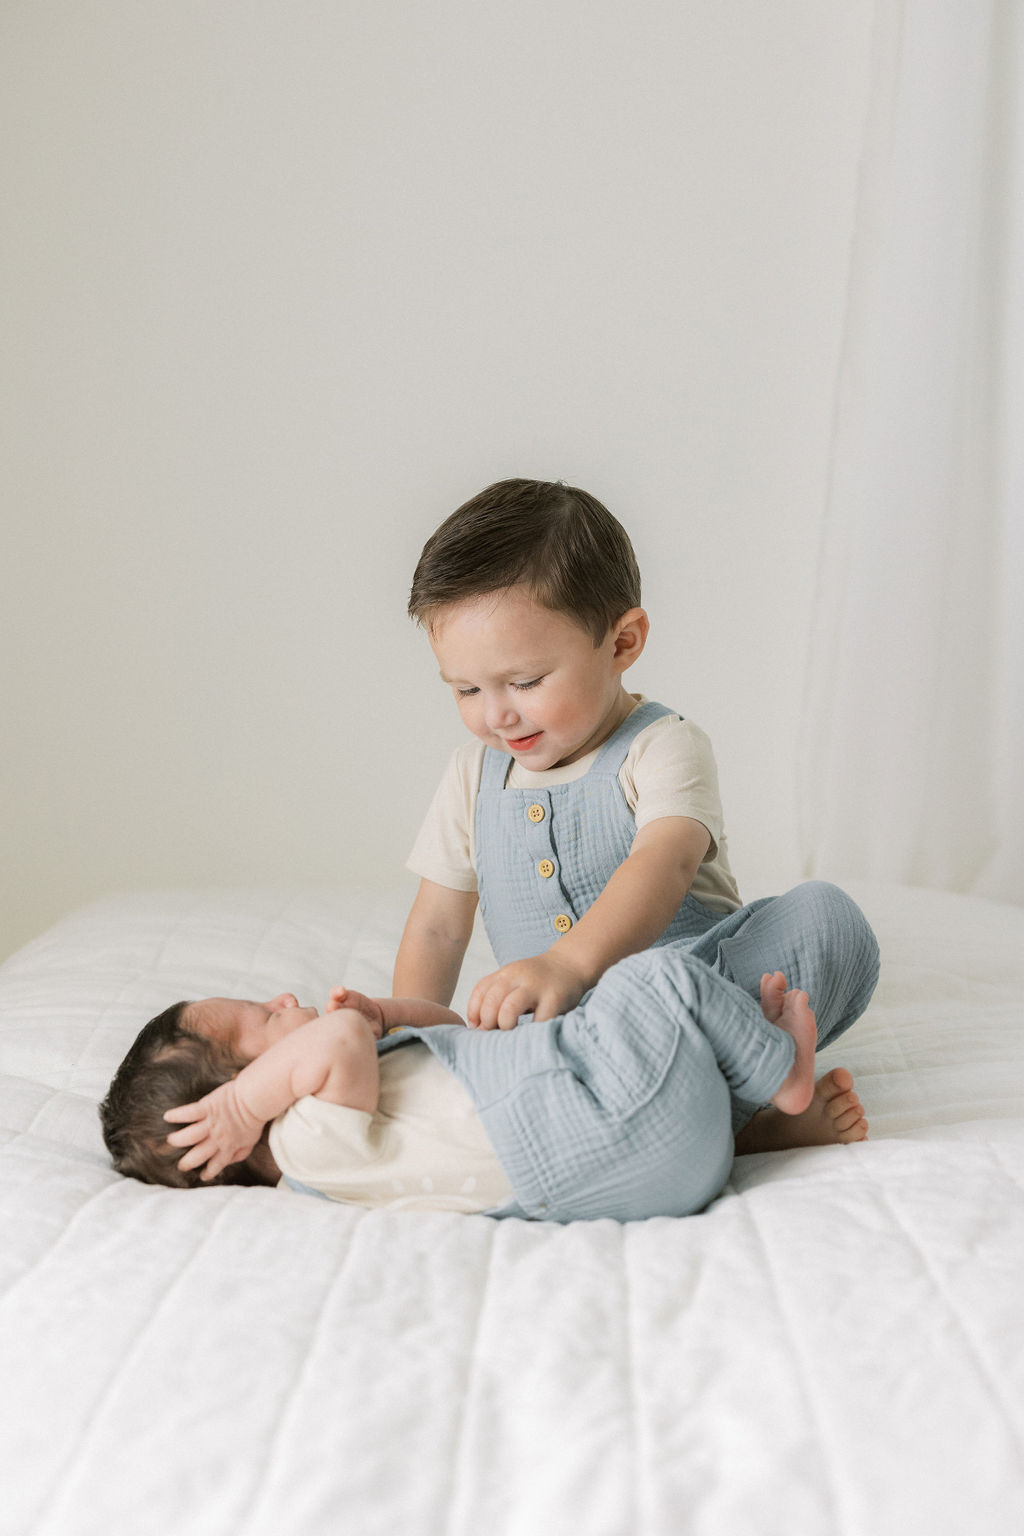 A young toddler boy in blue overalls tickles his newborn baby brother while on a bed in matching overalls after meeting branchburg lactation